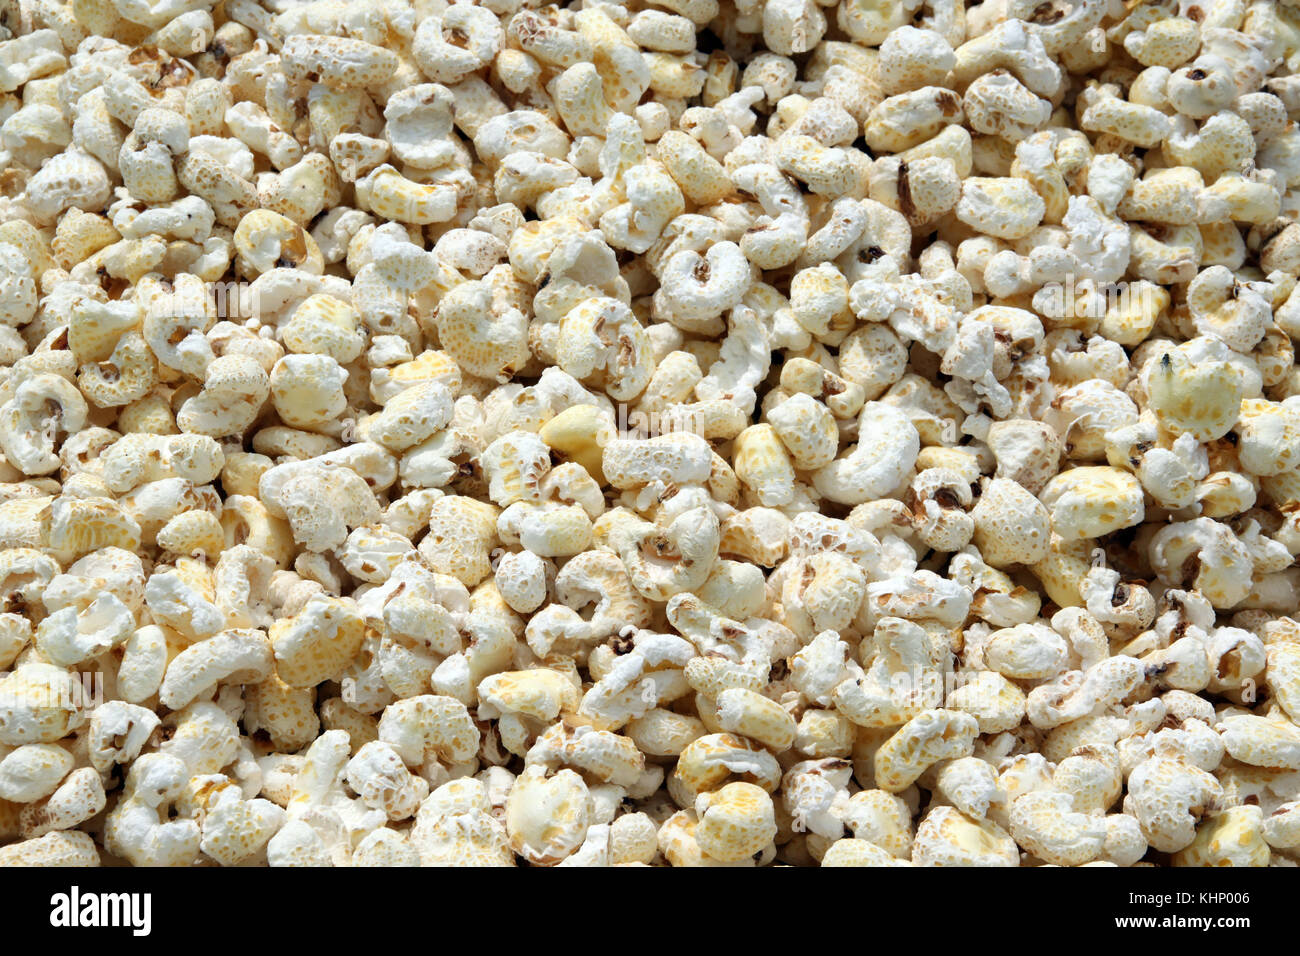 Alot of big popcorn on the table Stock Photo